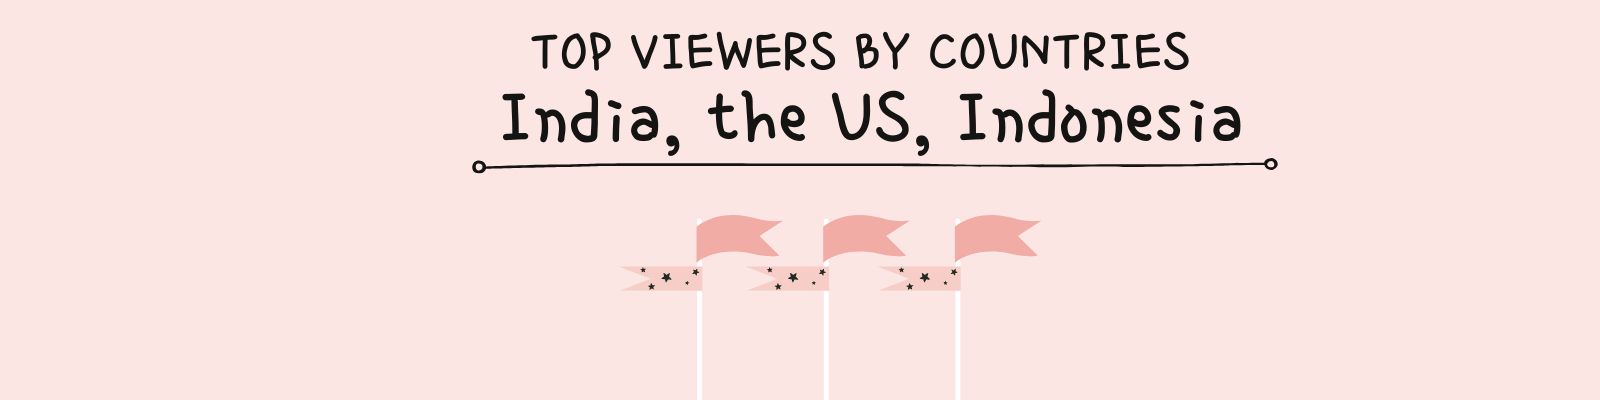 information about top countries where YouTube is the most popular 